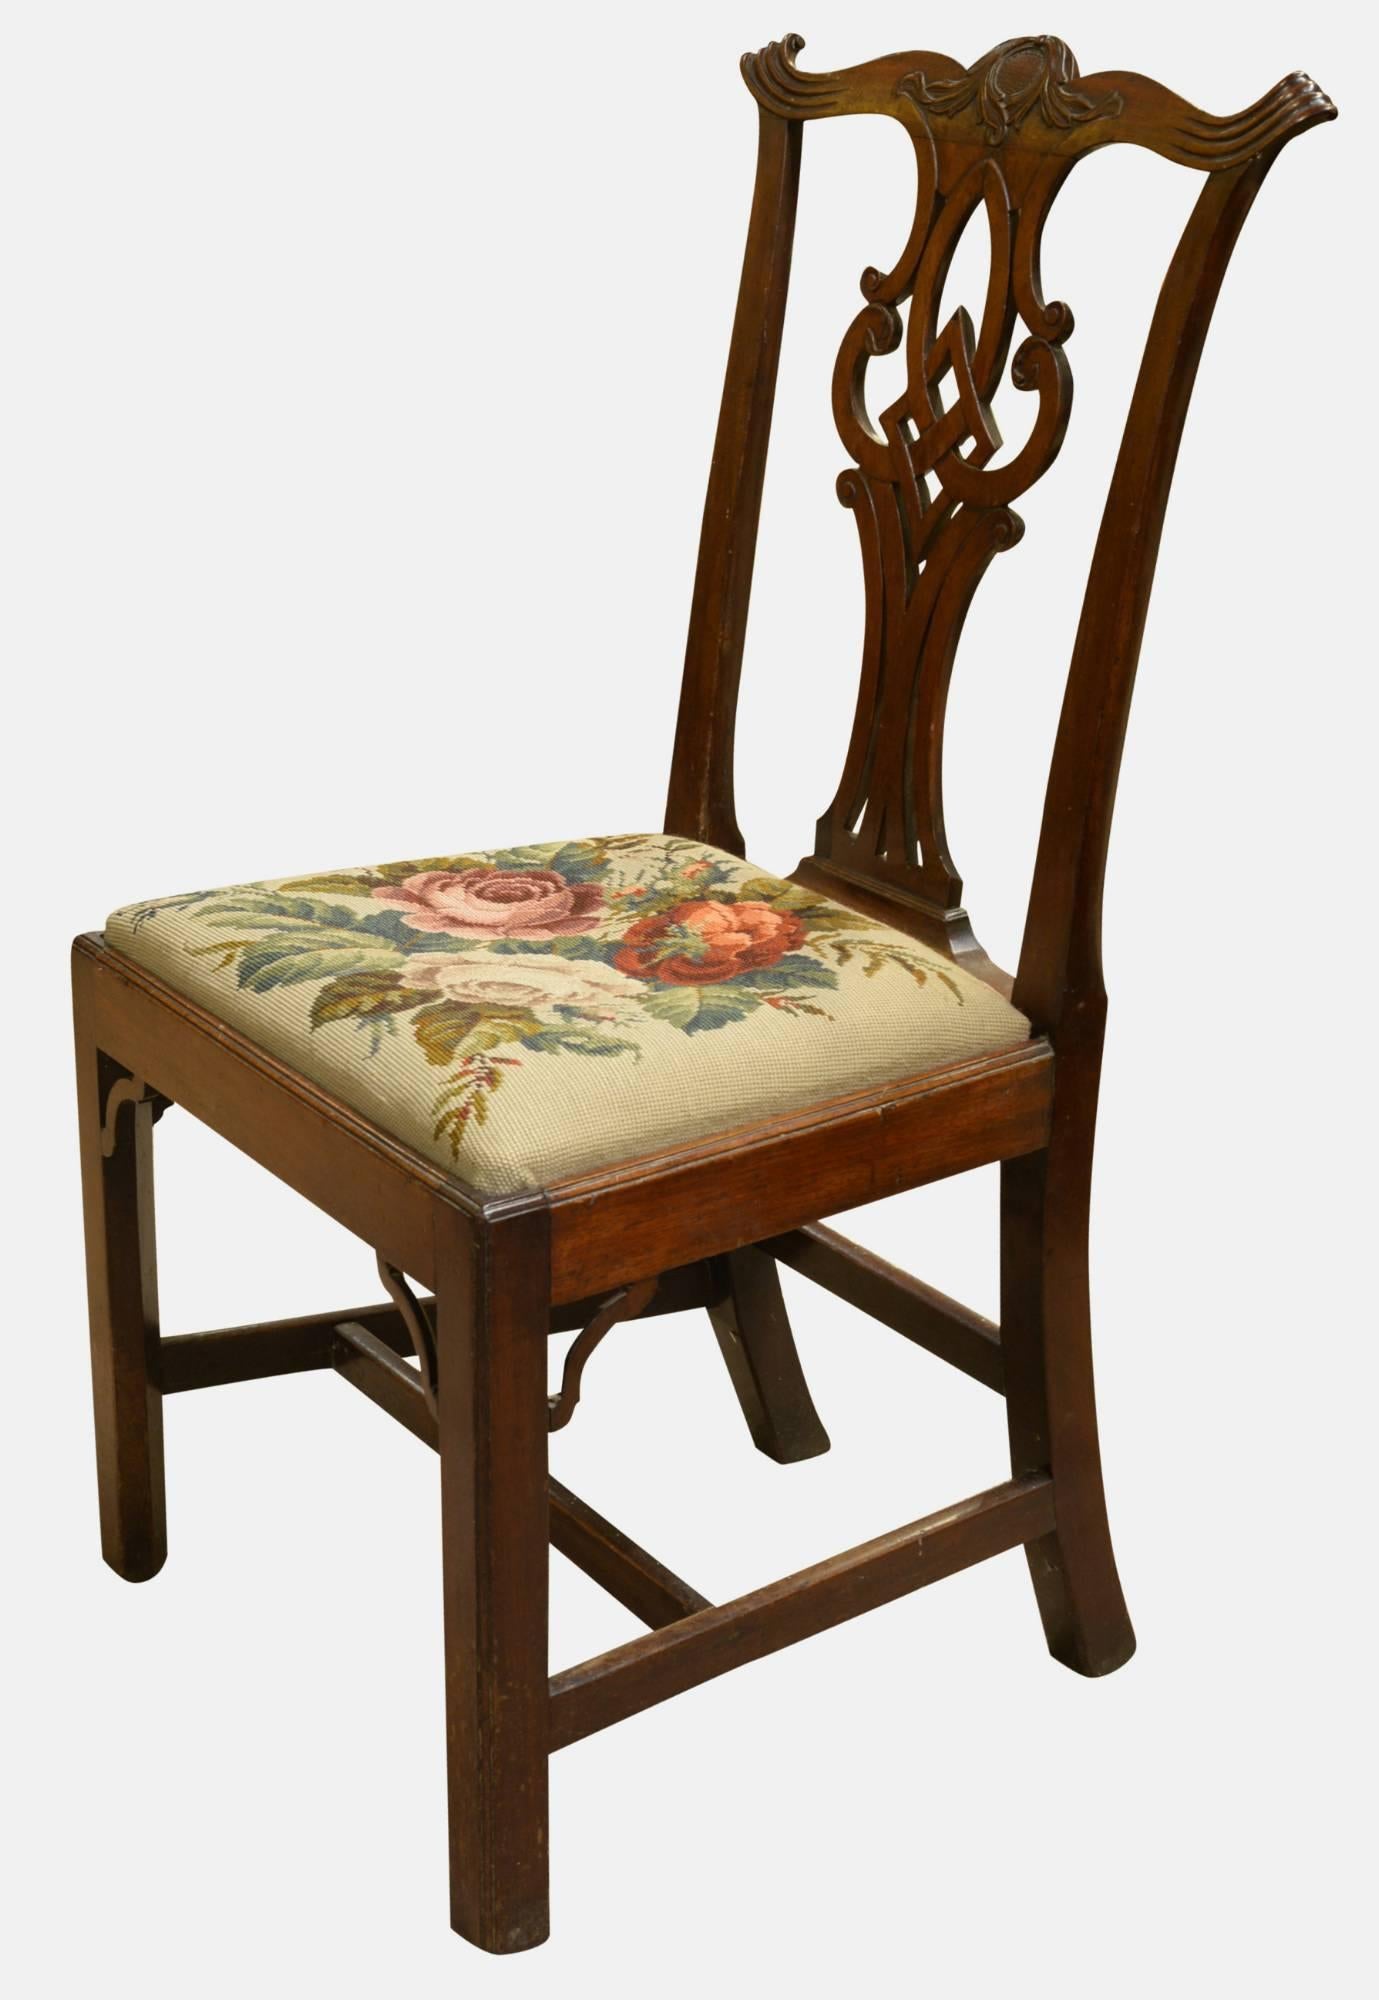 A single Chippendale period mahogany chair with finely carved back,

circa 1760.